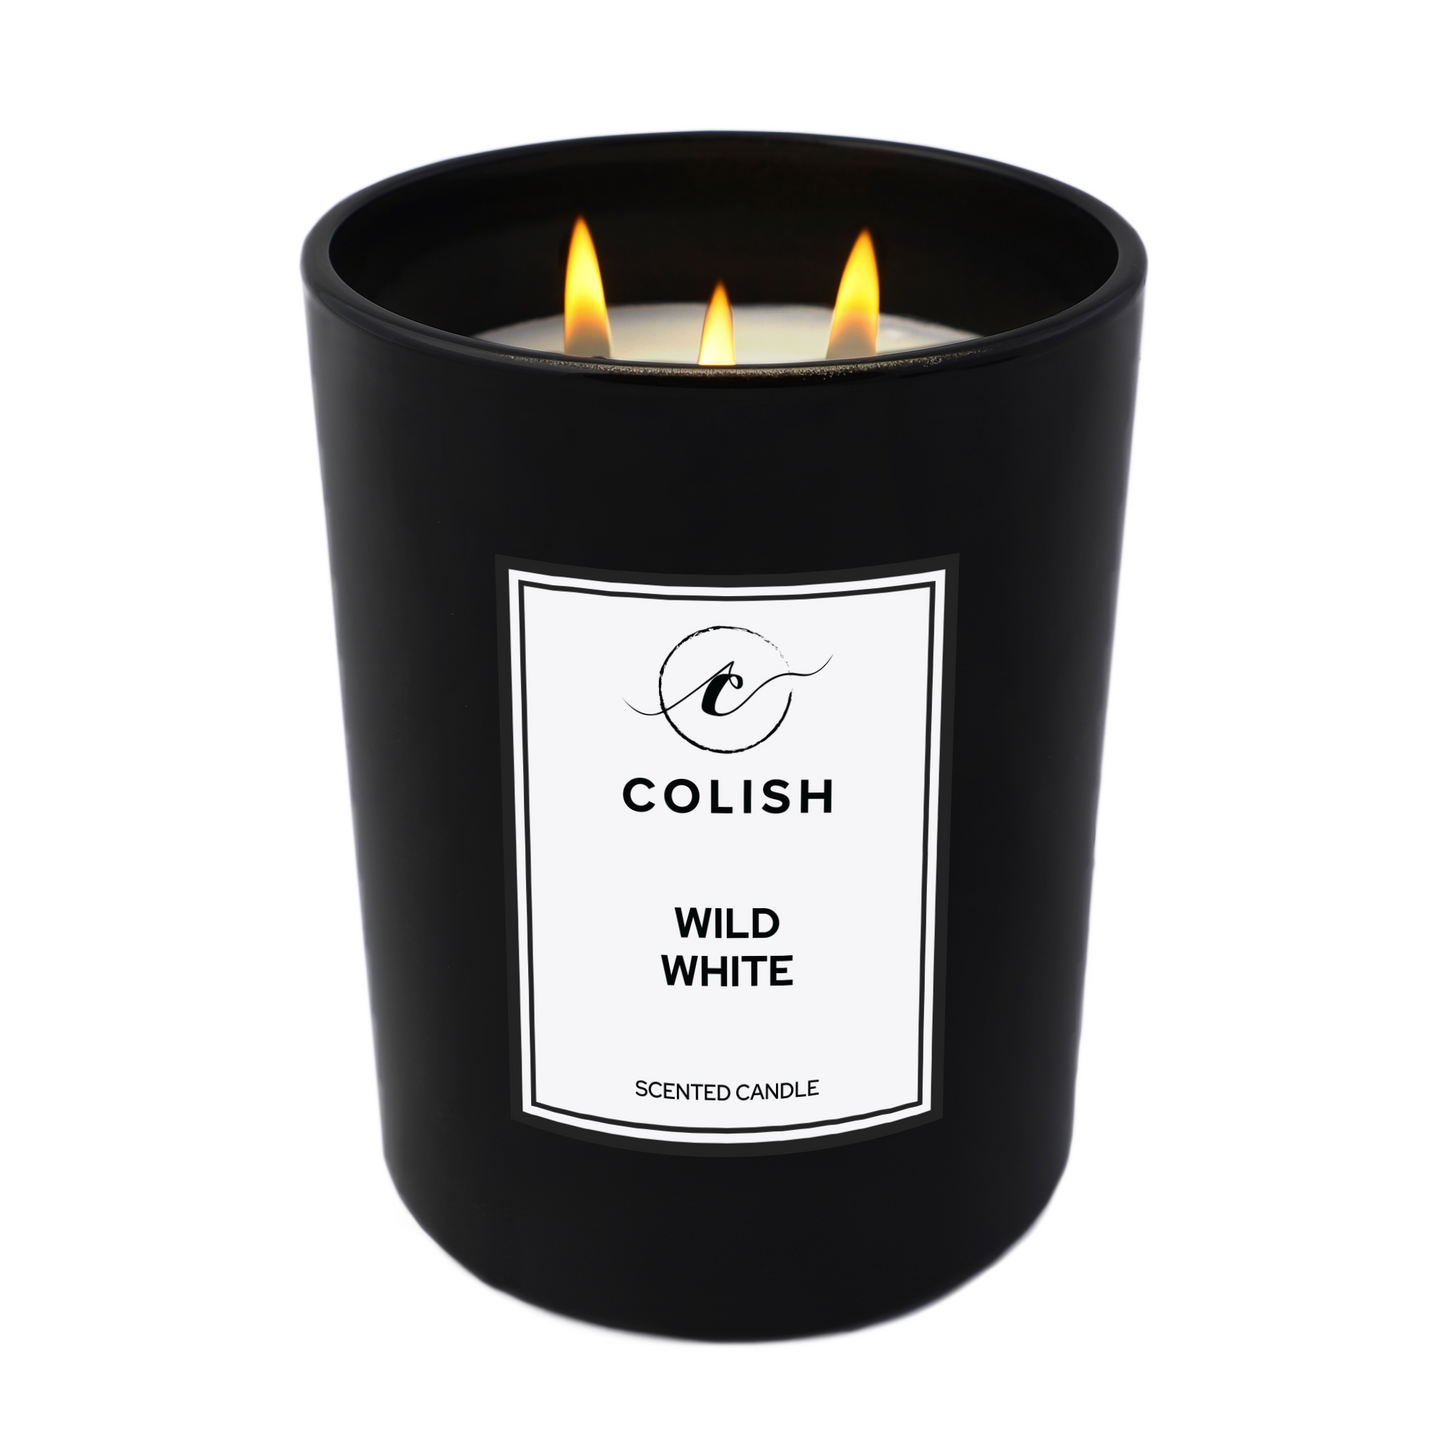 WILD WHITE SCENTED CANDLE